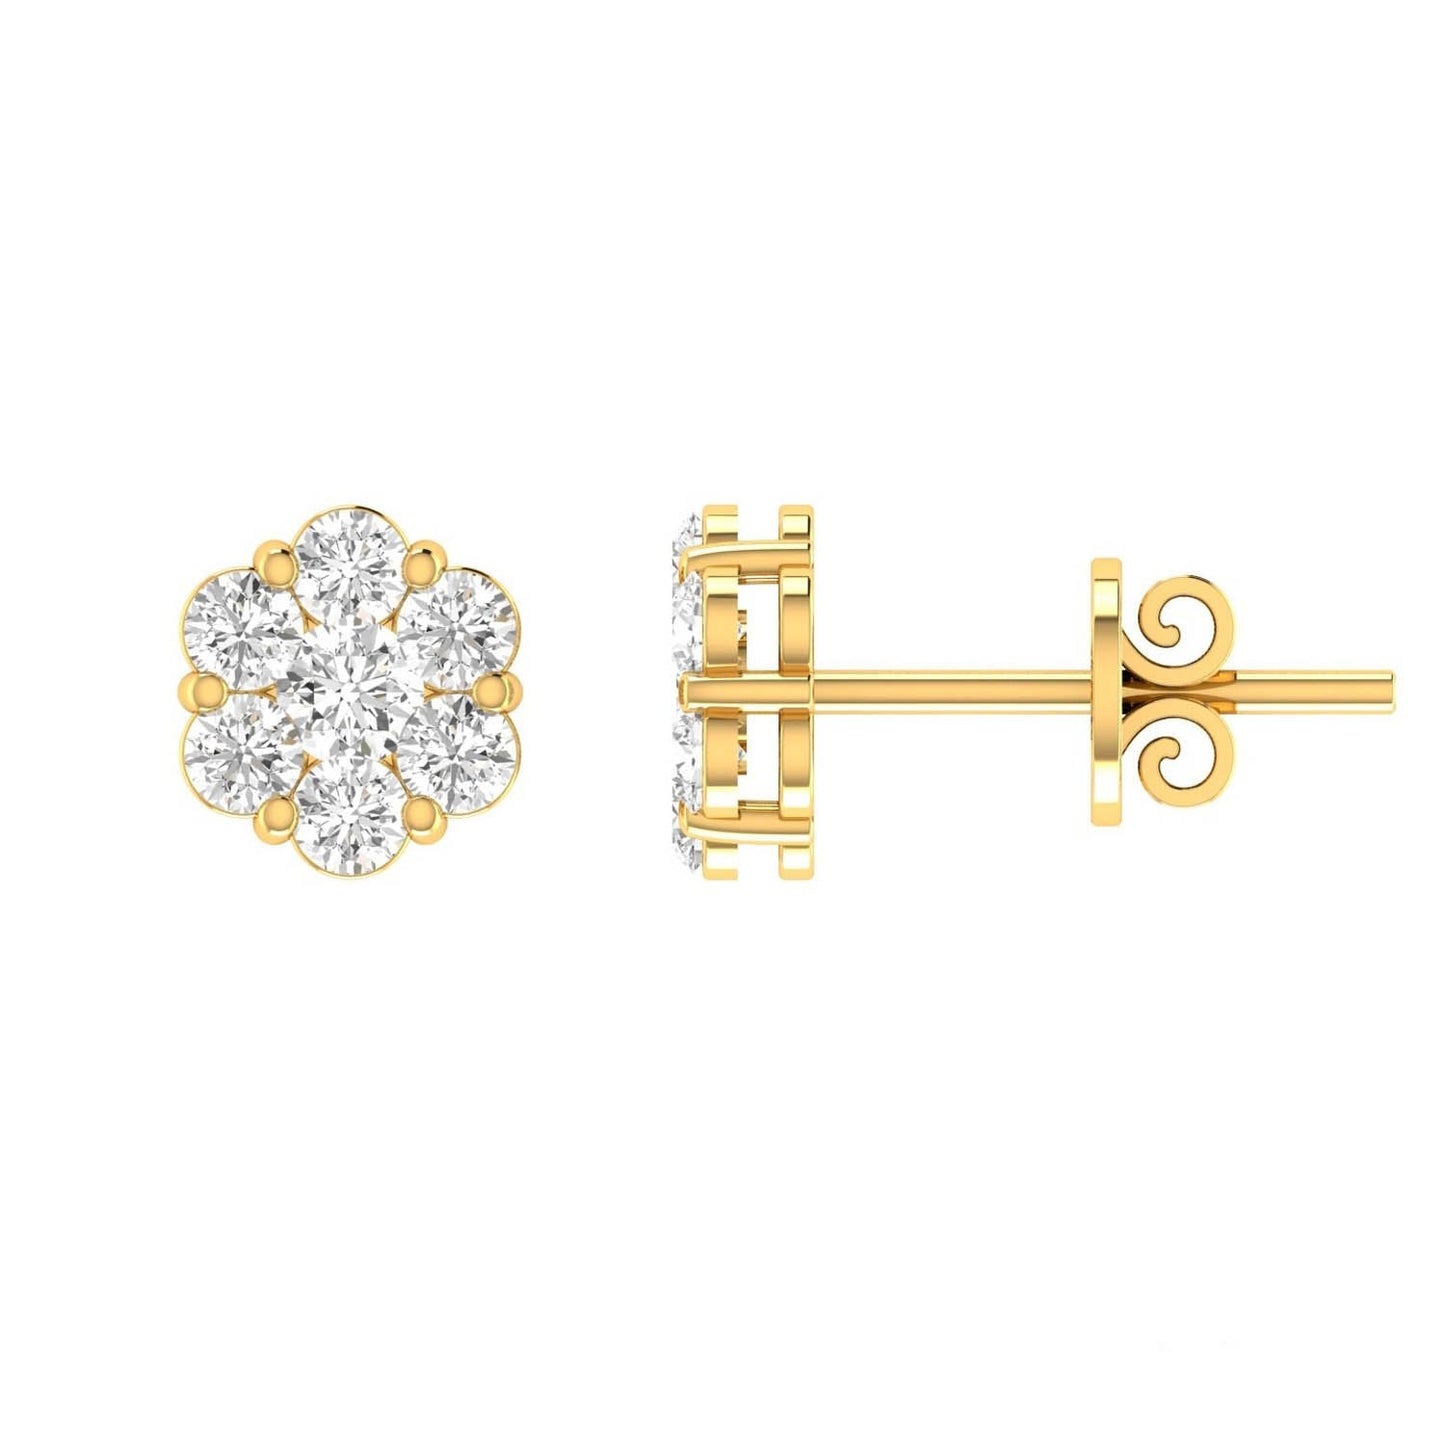 Cluster Stud Diamond Earrings with 0.50ct Diamonds in 9K Yellow Gold - RJ9YECLUS50GH